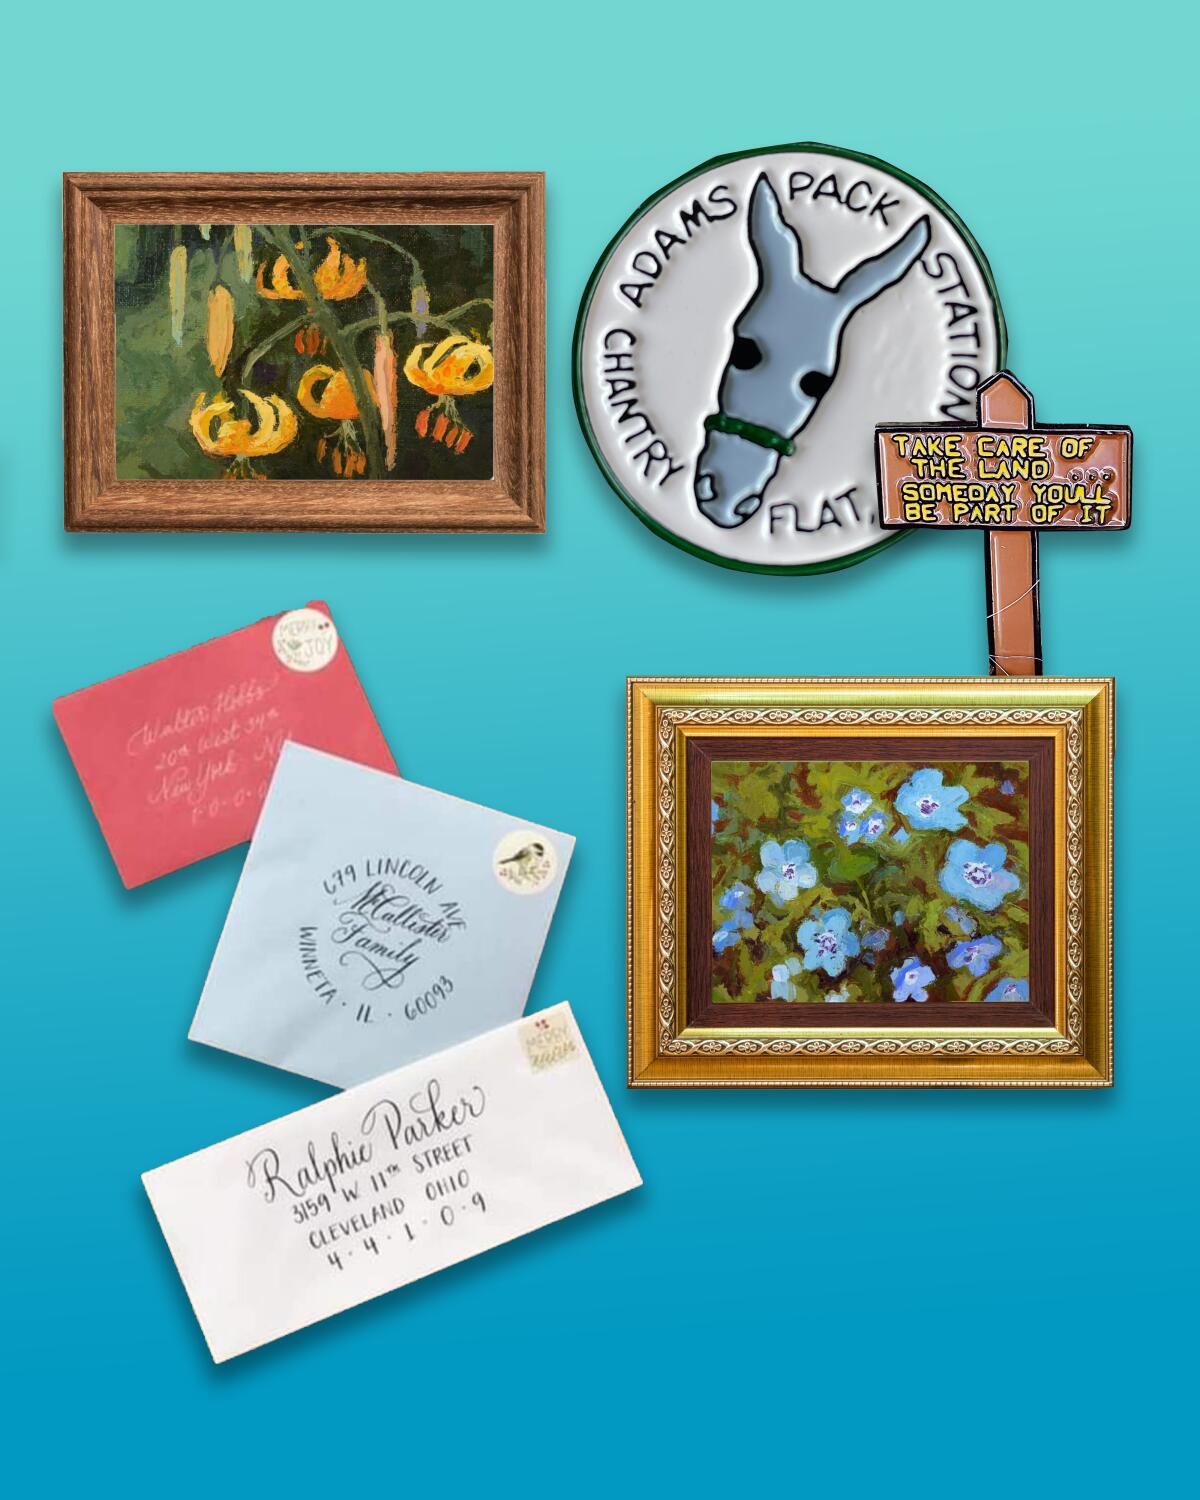 Calligraphy, cards based on oil paintings, wearable pin